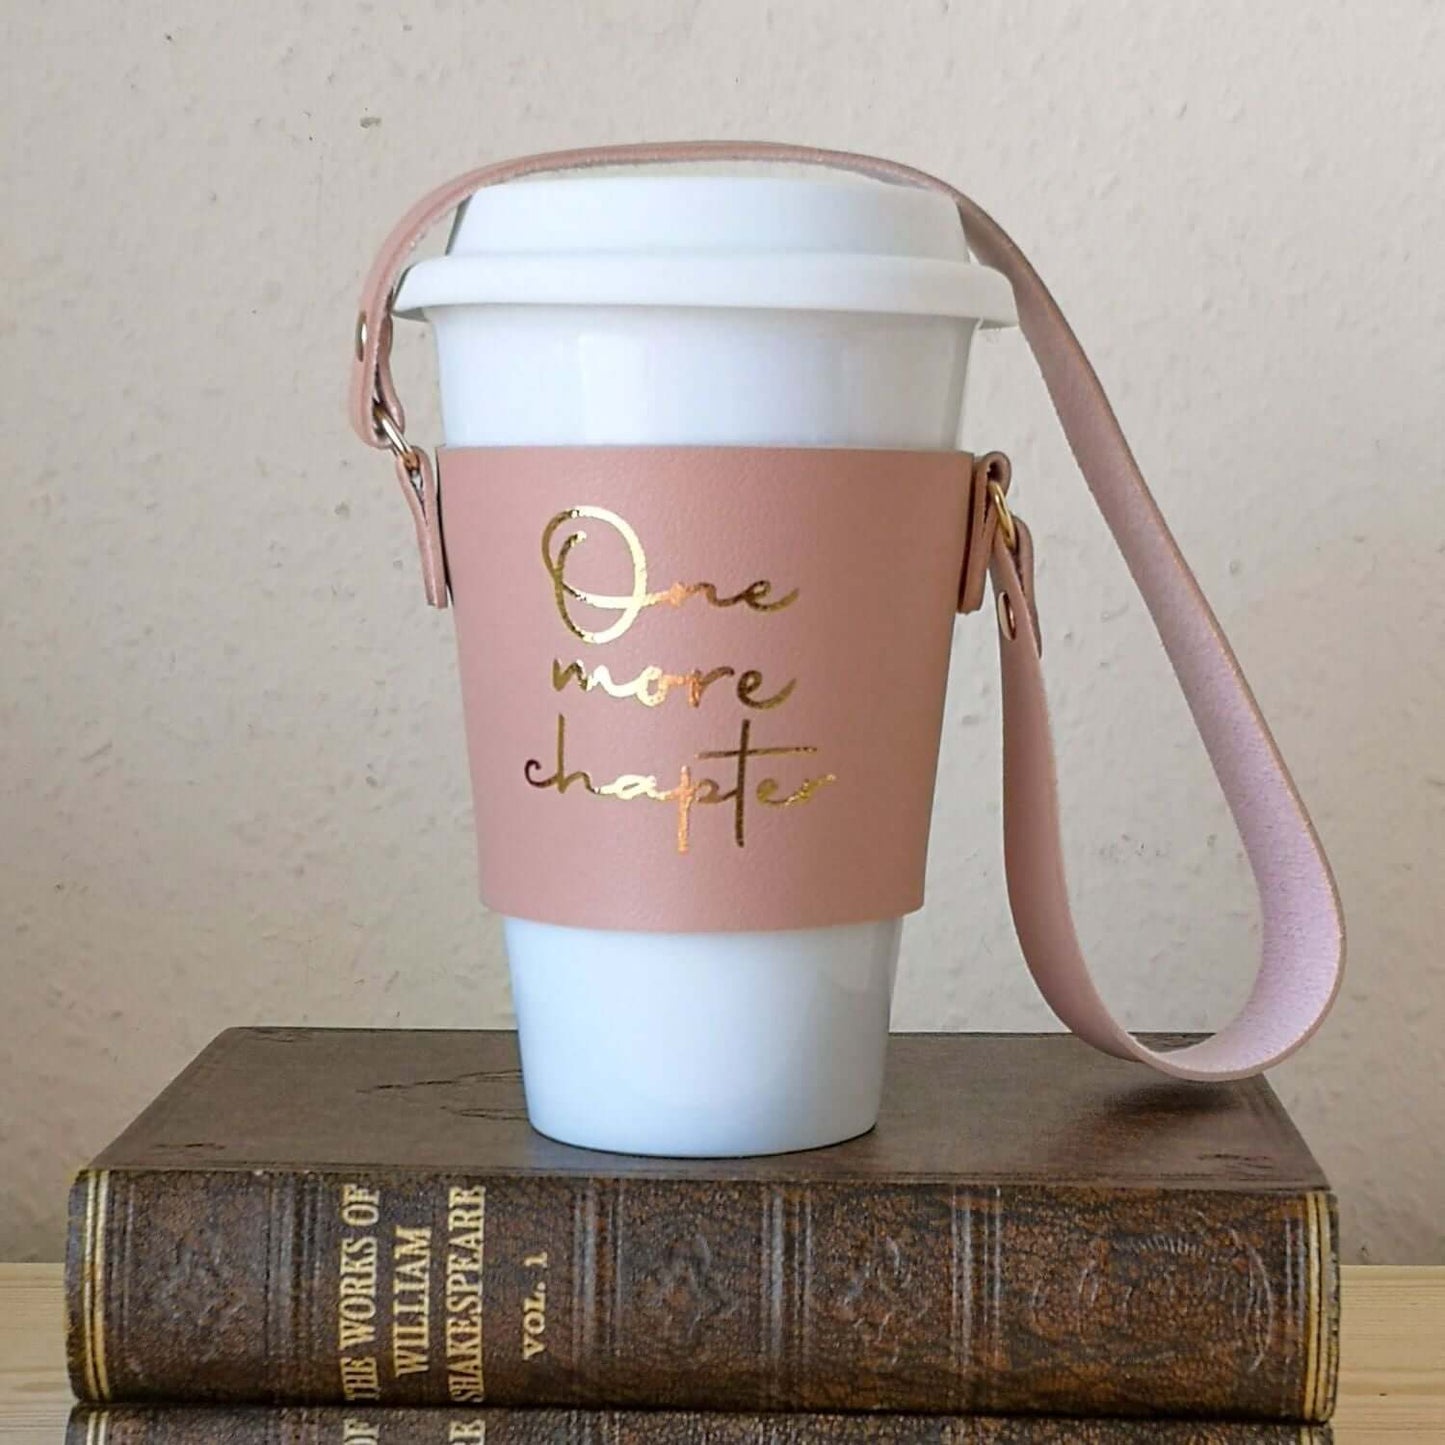 Coffee Cup Sleeve - Strap - One More Chapter